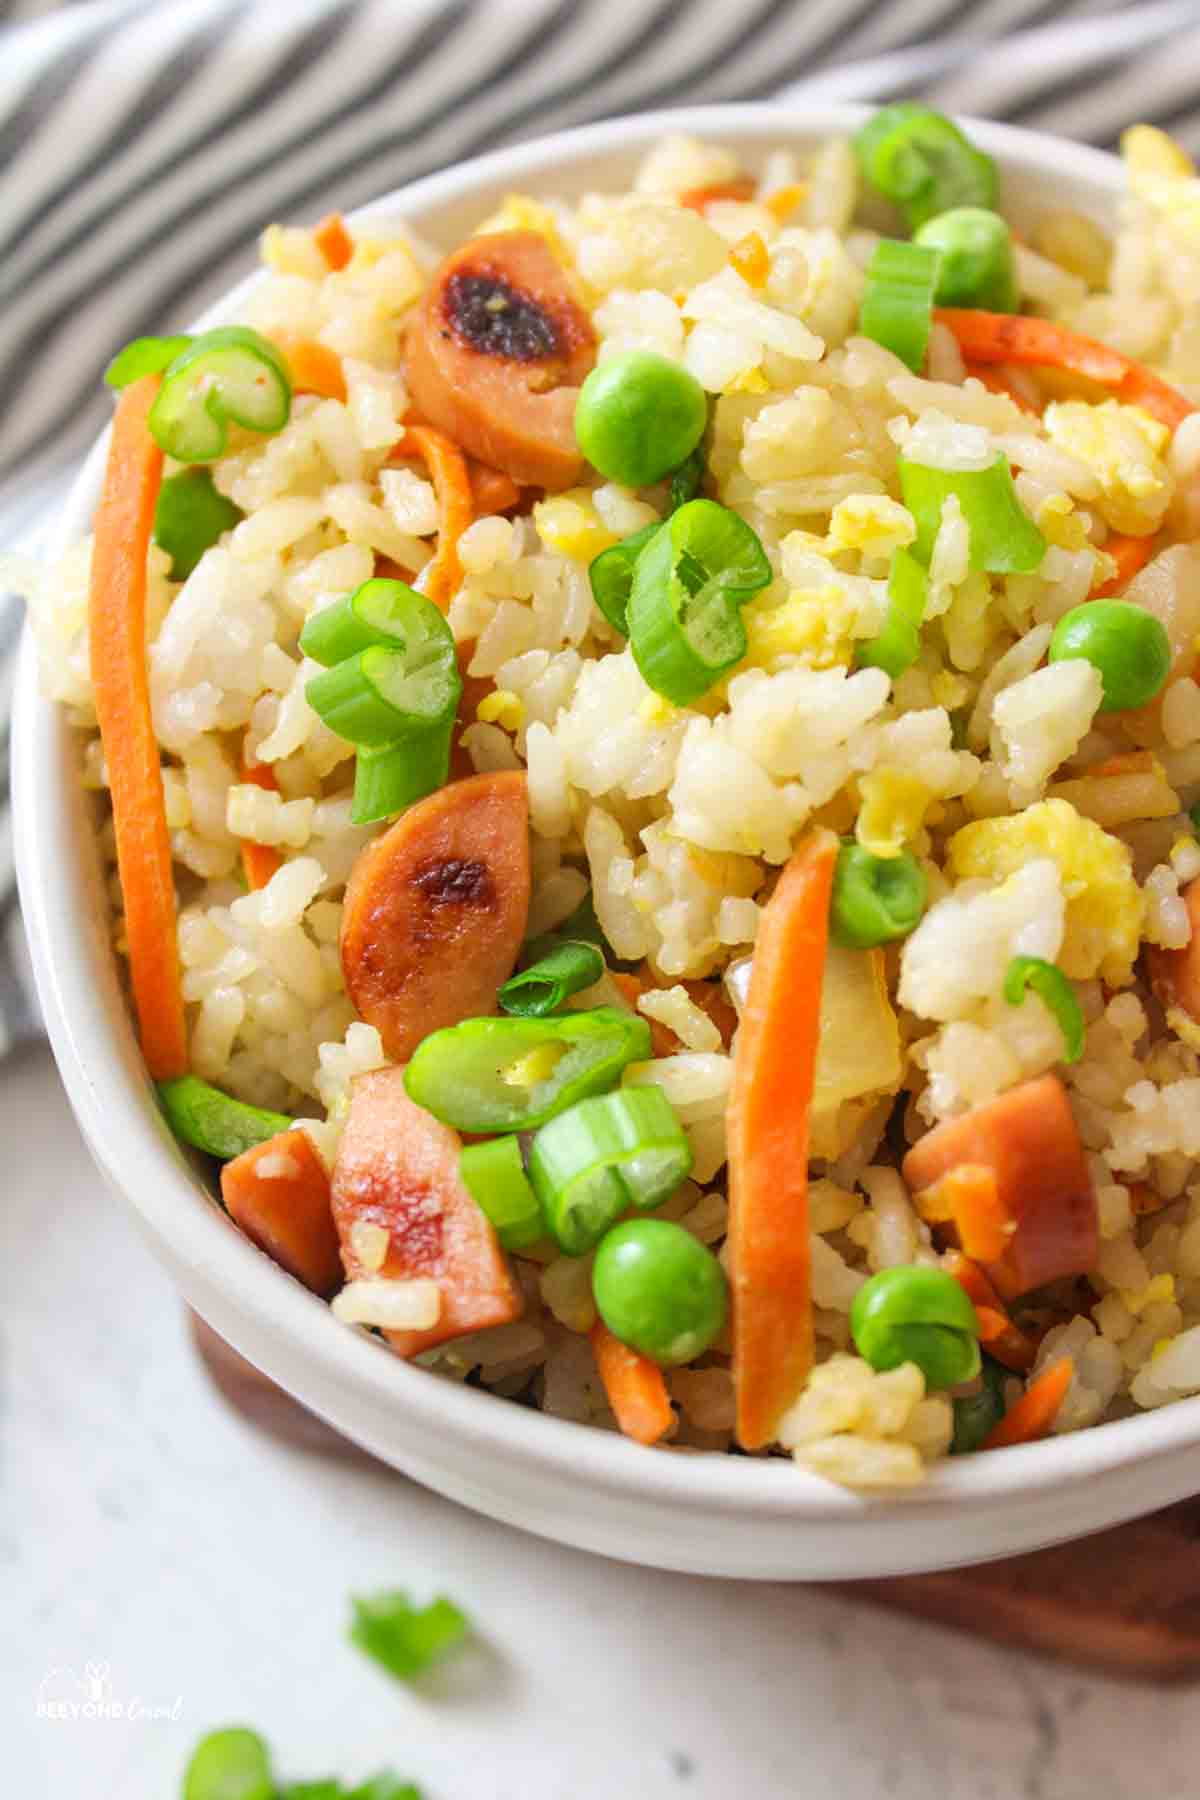 a close up angled view of a bowl filled with hot dog fried rice and garnished with sliced green onions